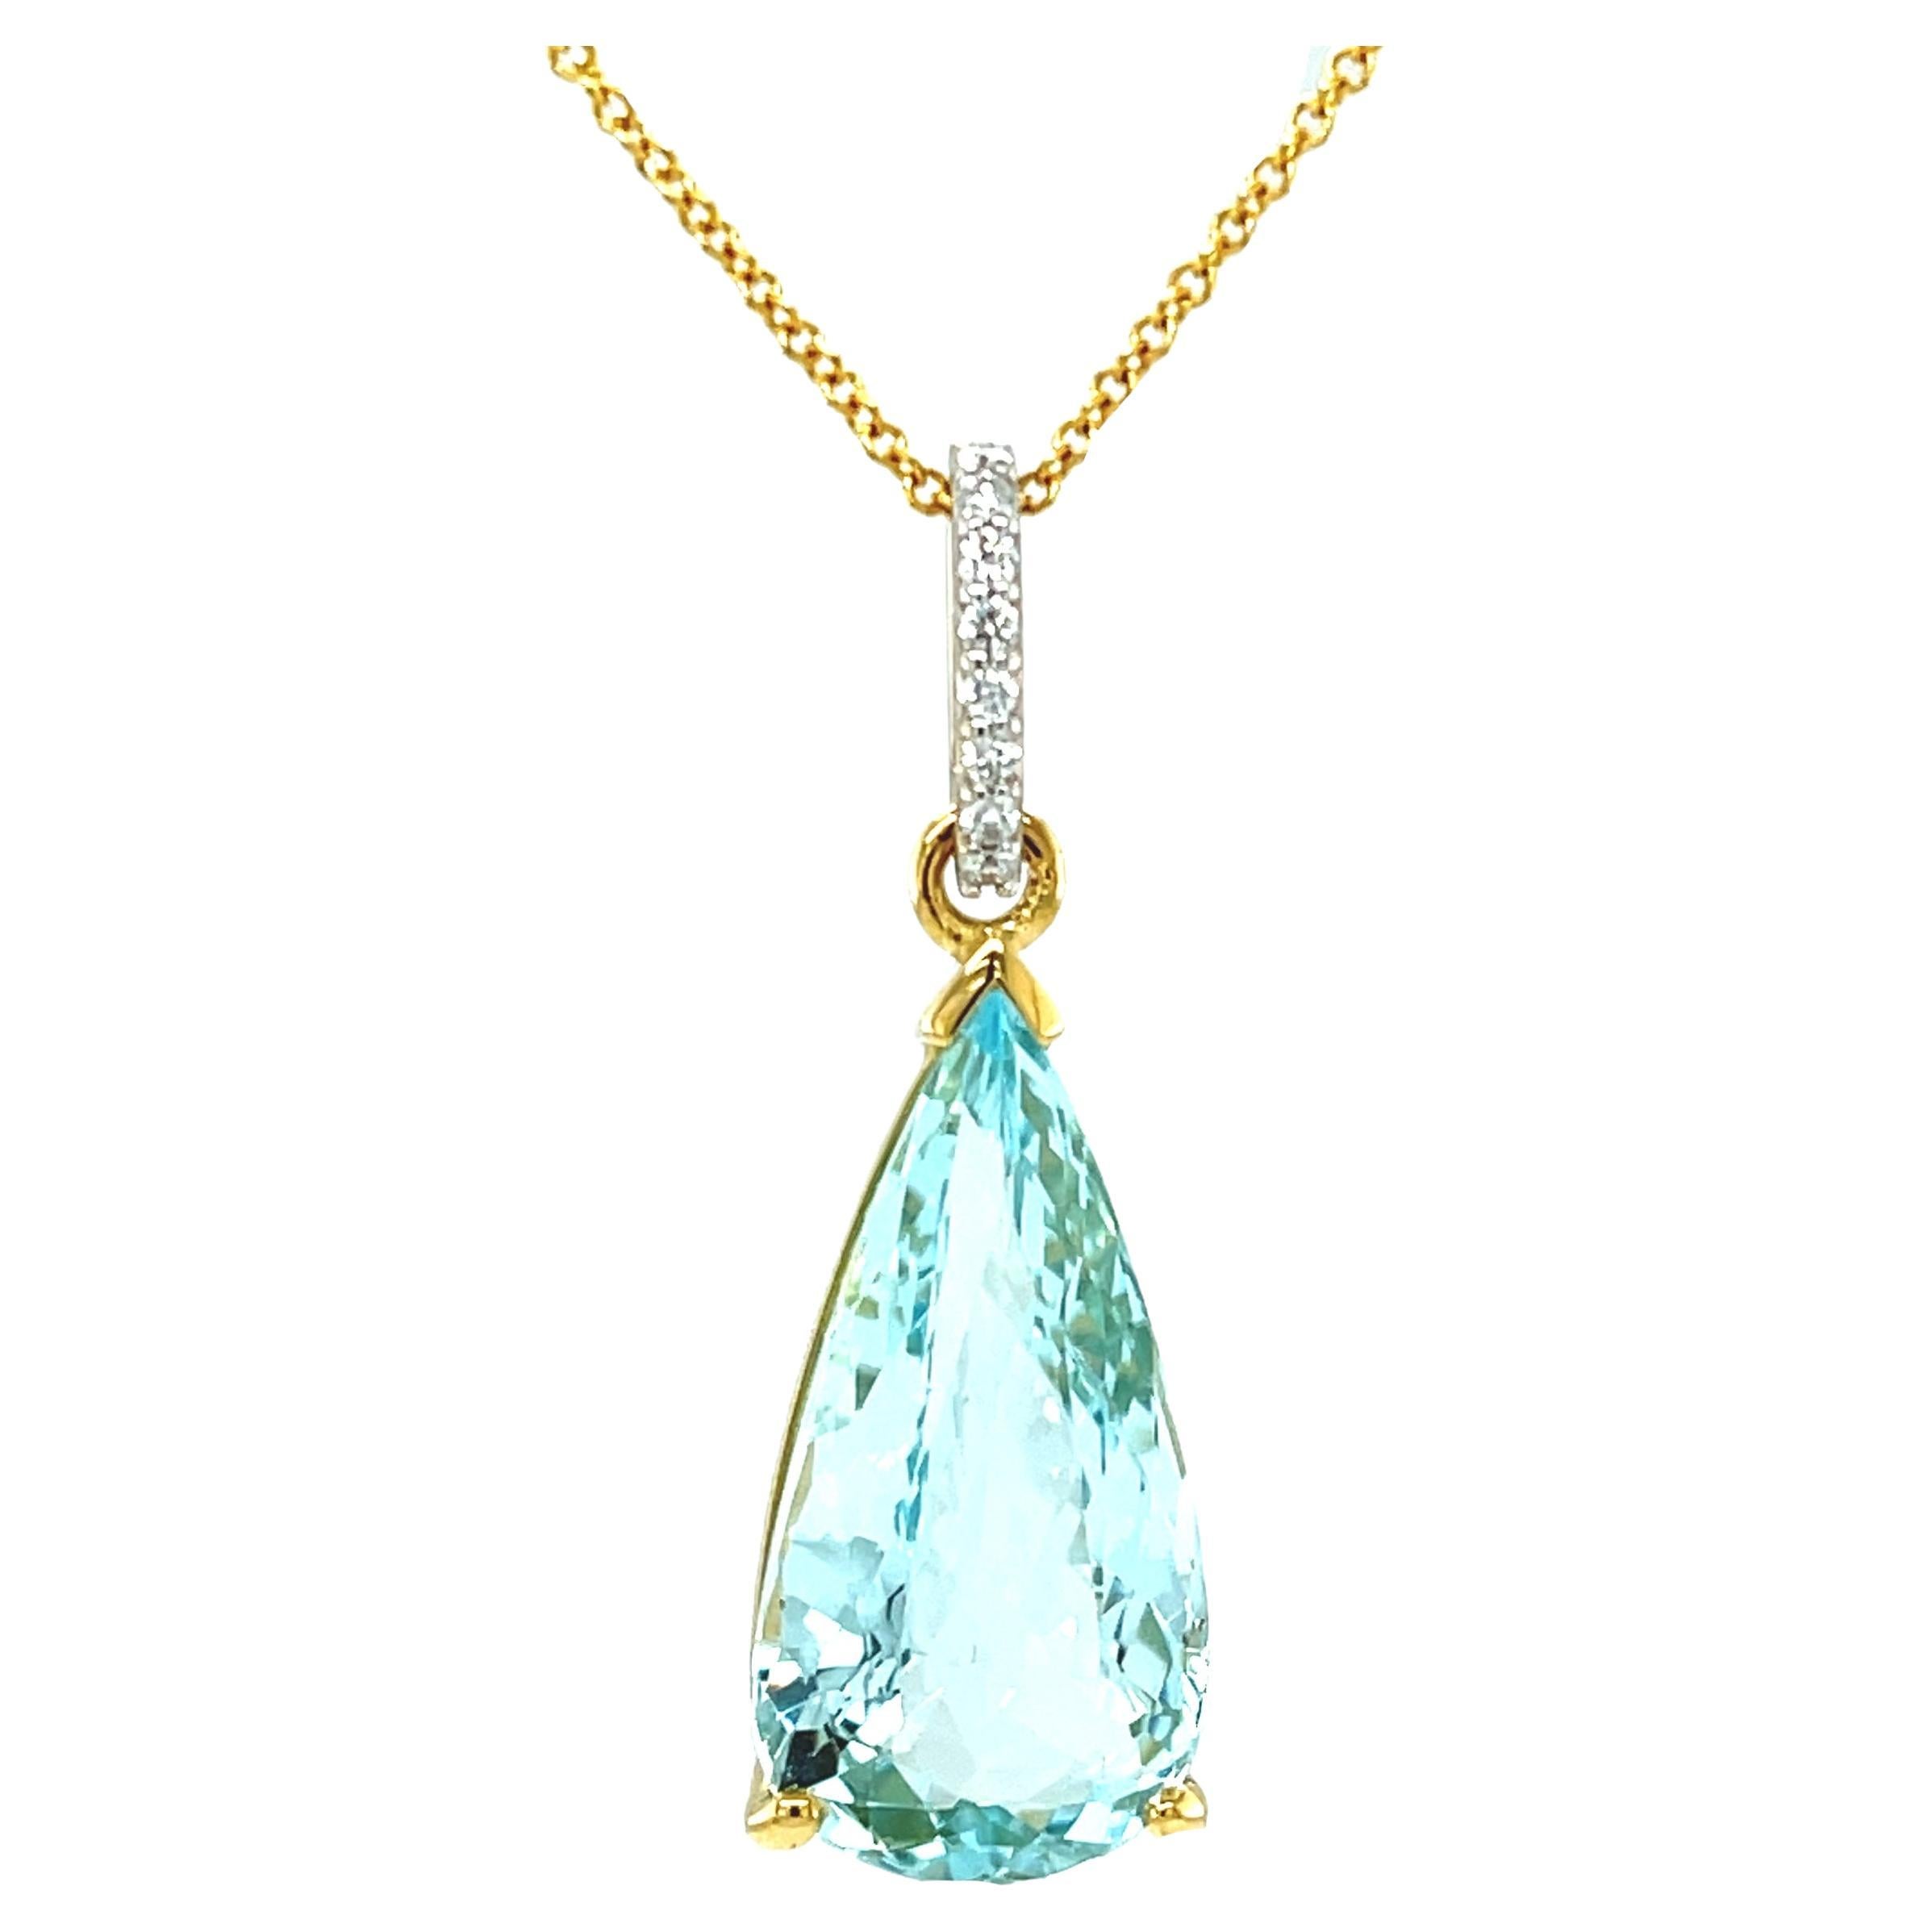  7.07 Carat Aquamarine and Diamond Pendant in White and Yellow Gold For Sale